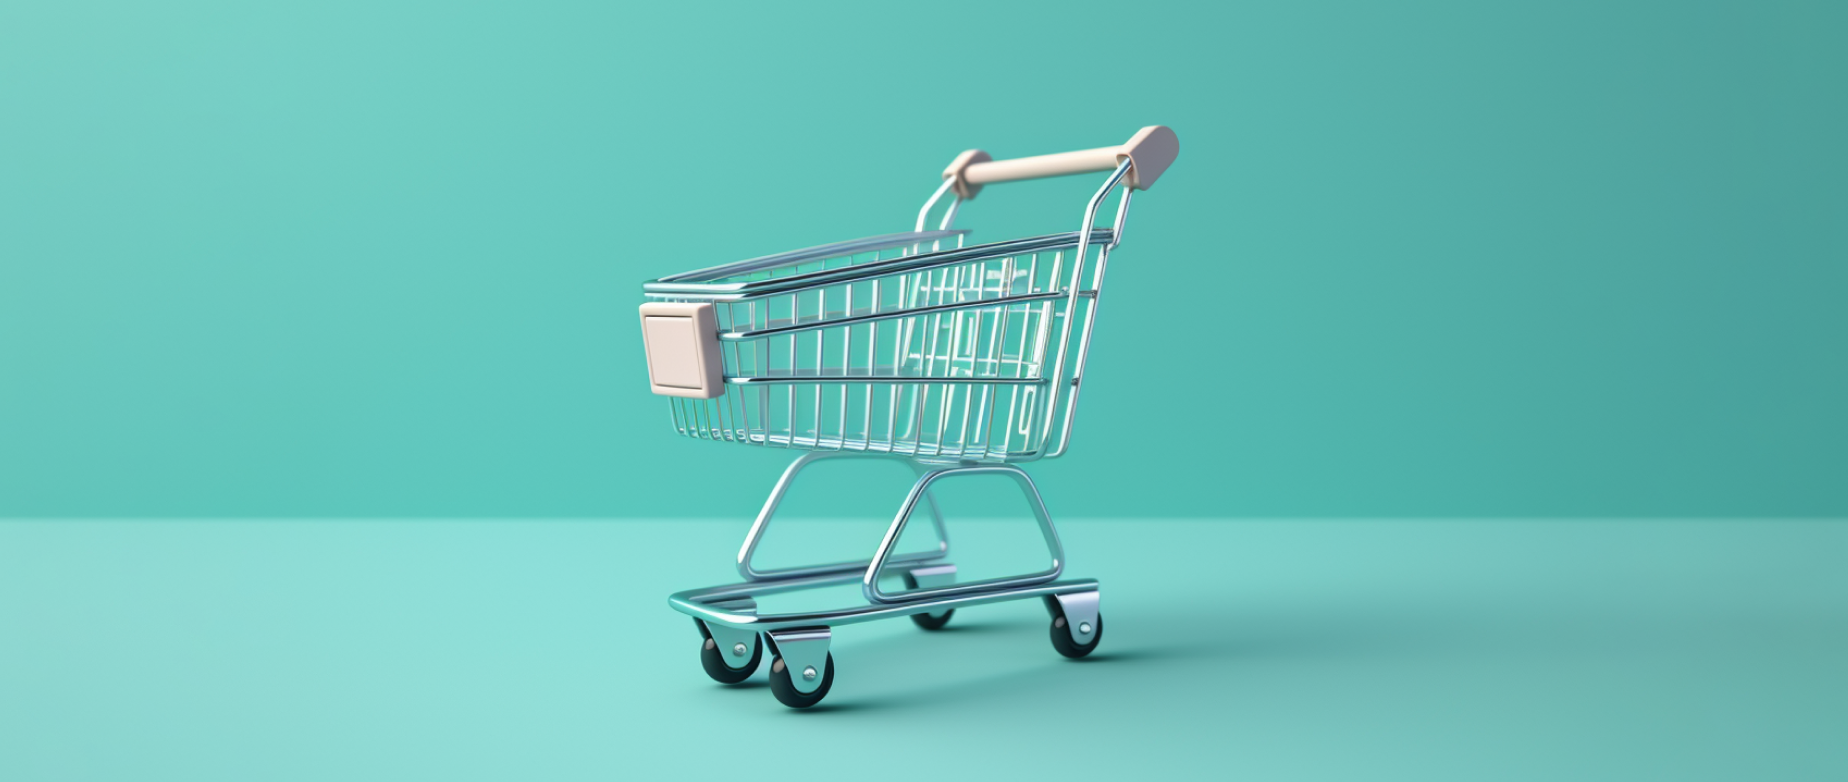 a shopping cart against a teal background: retail clienteling